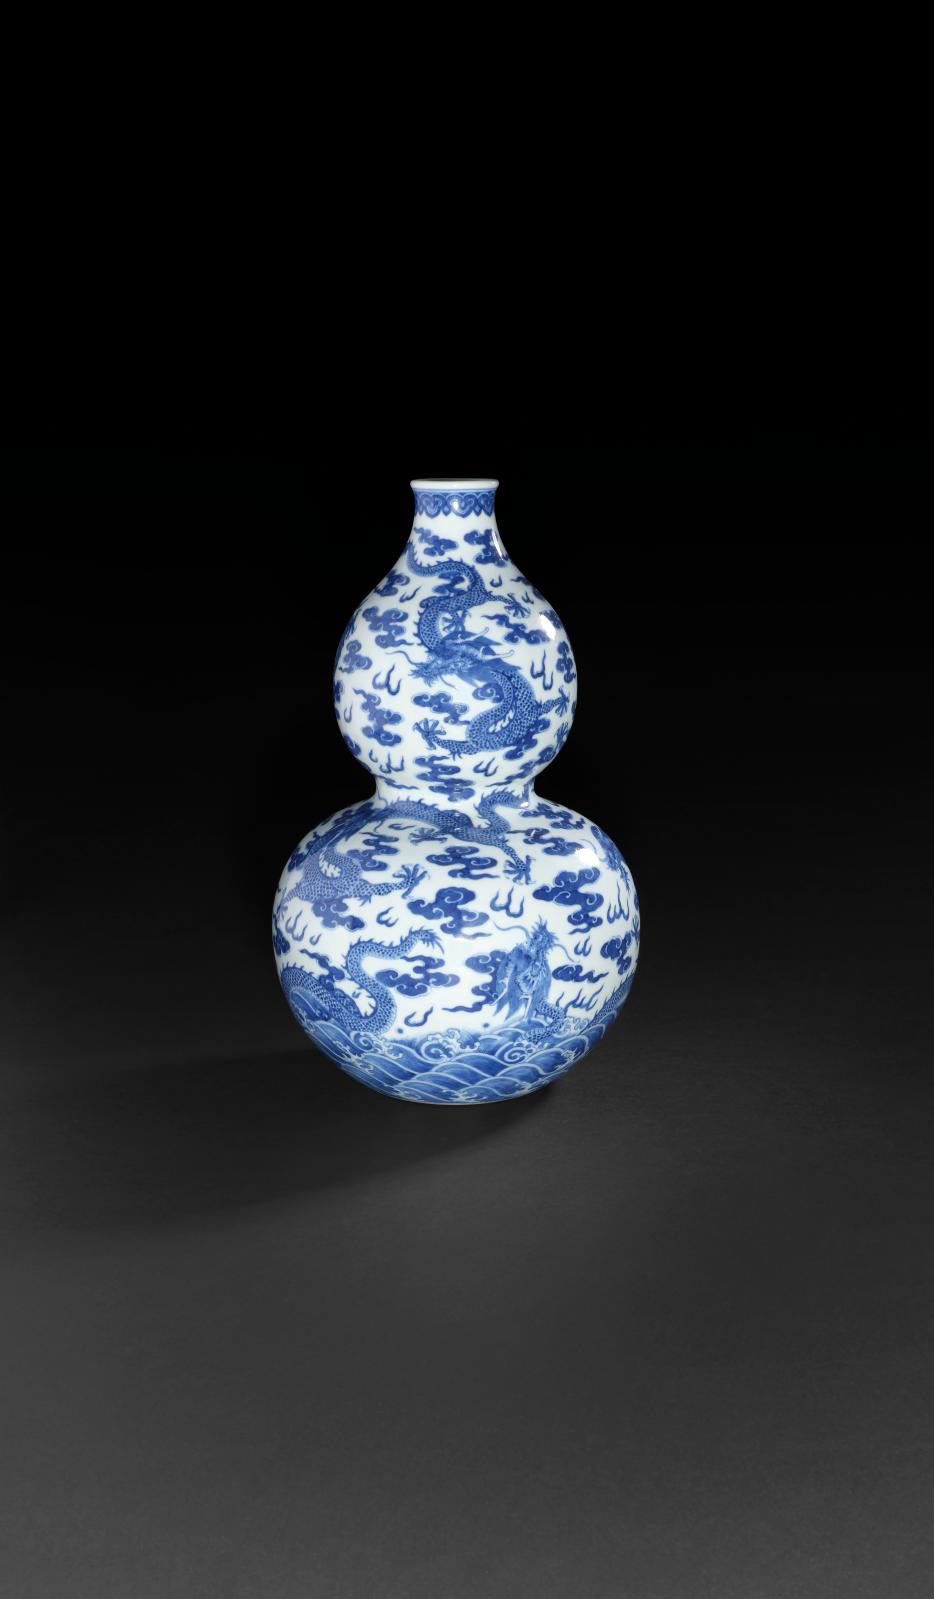 Chinese Jiaqing Imperial Vase: In Search of the Sacred Pearl